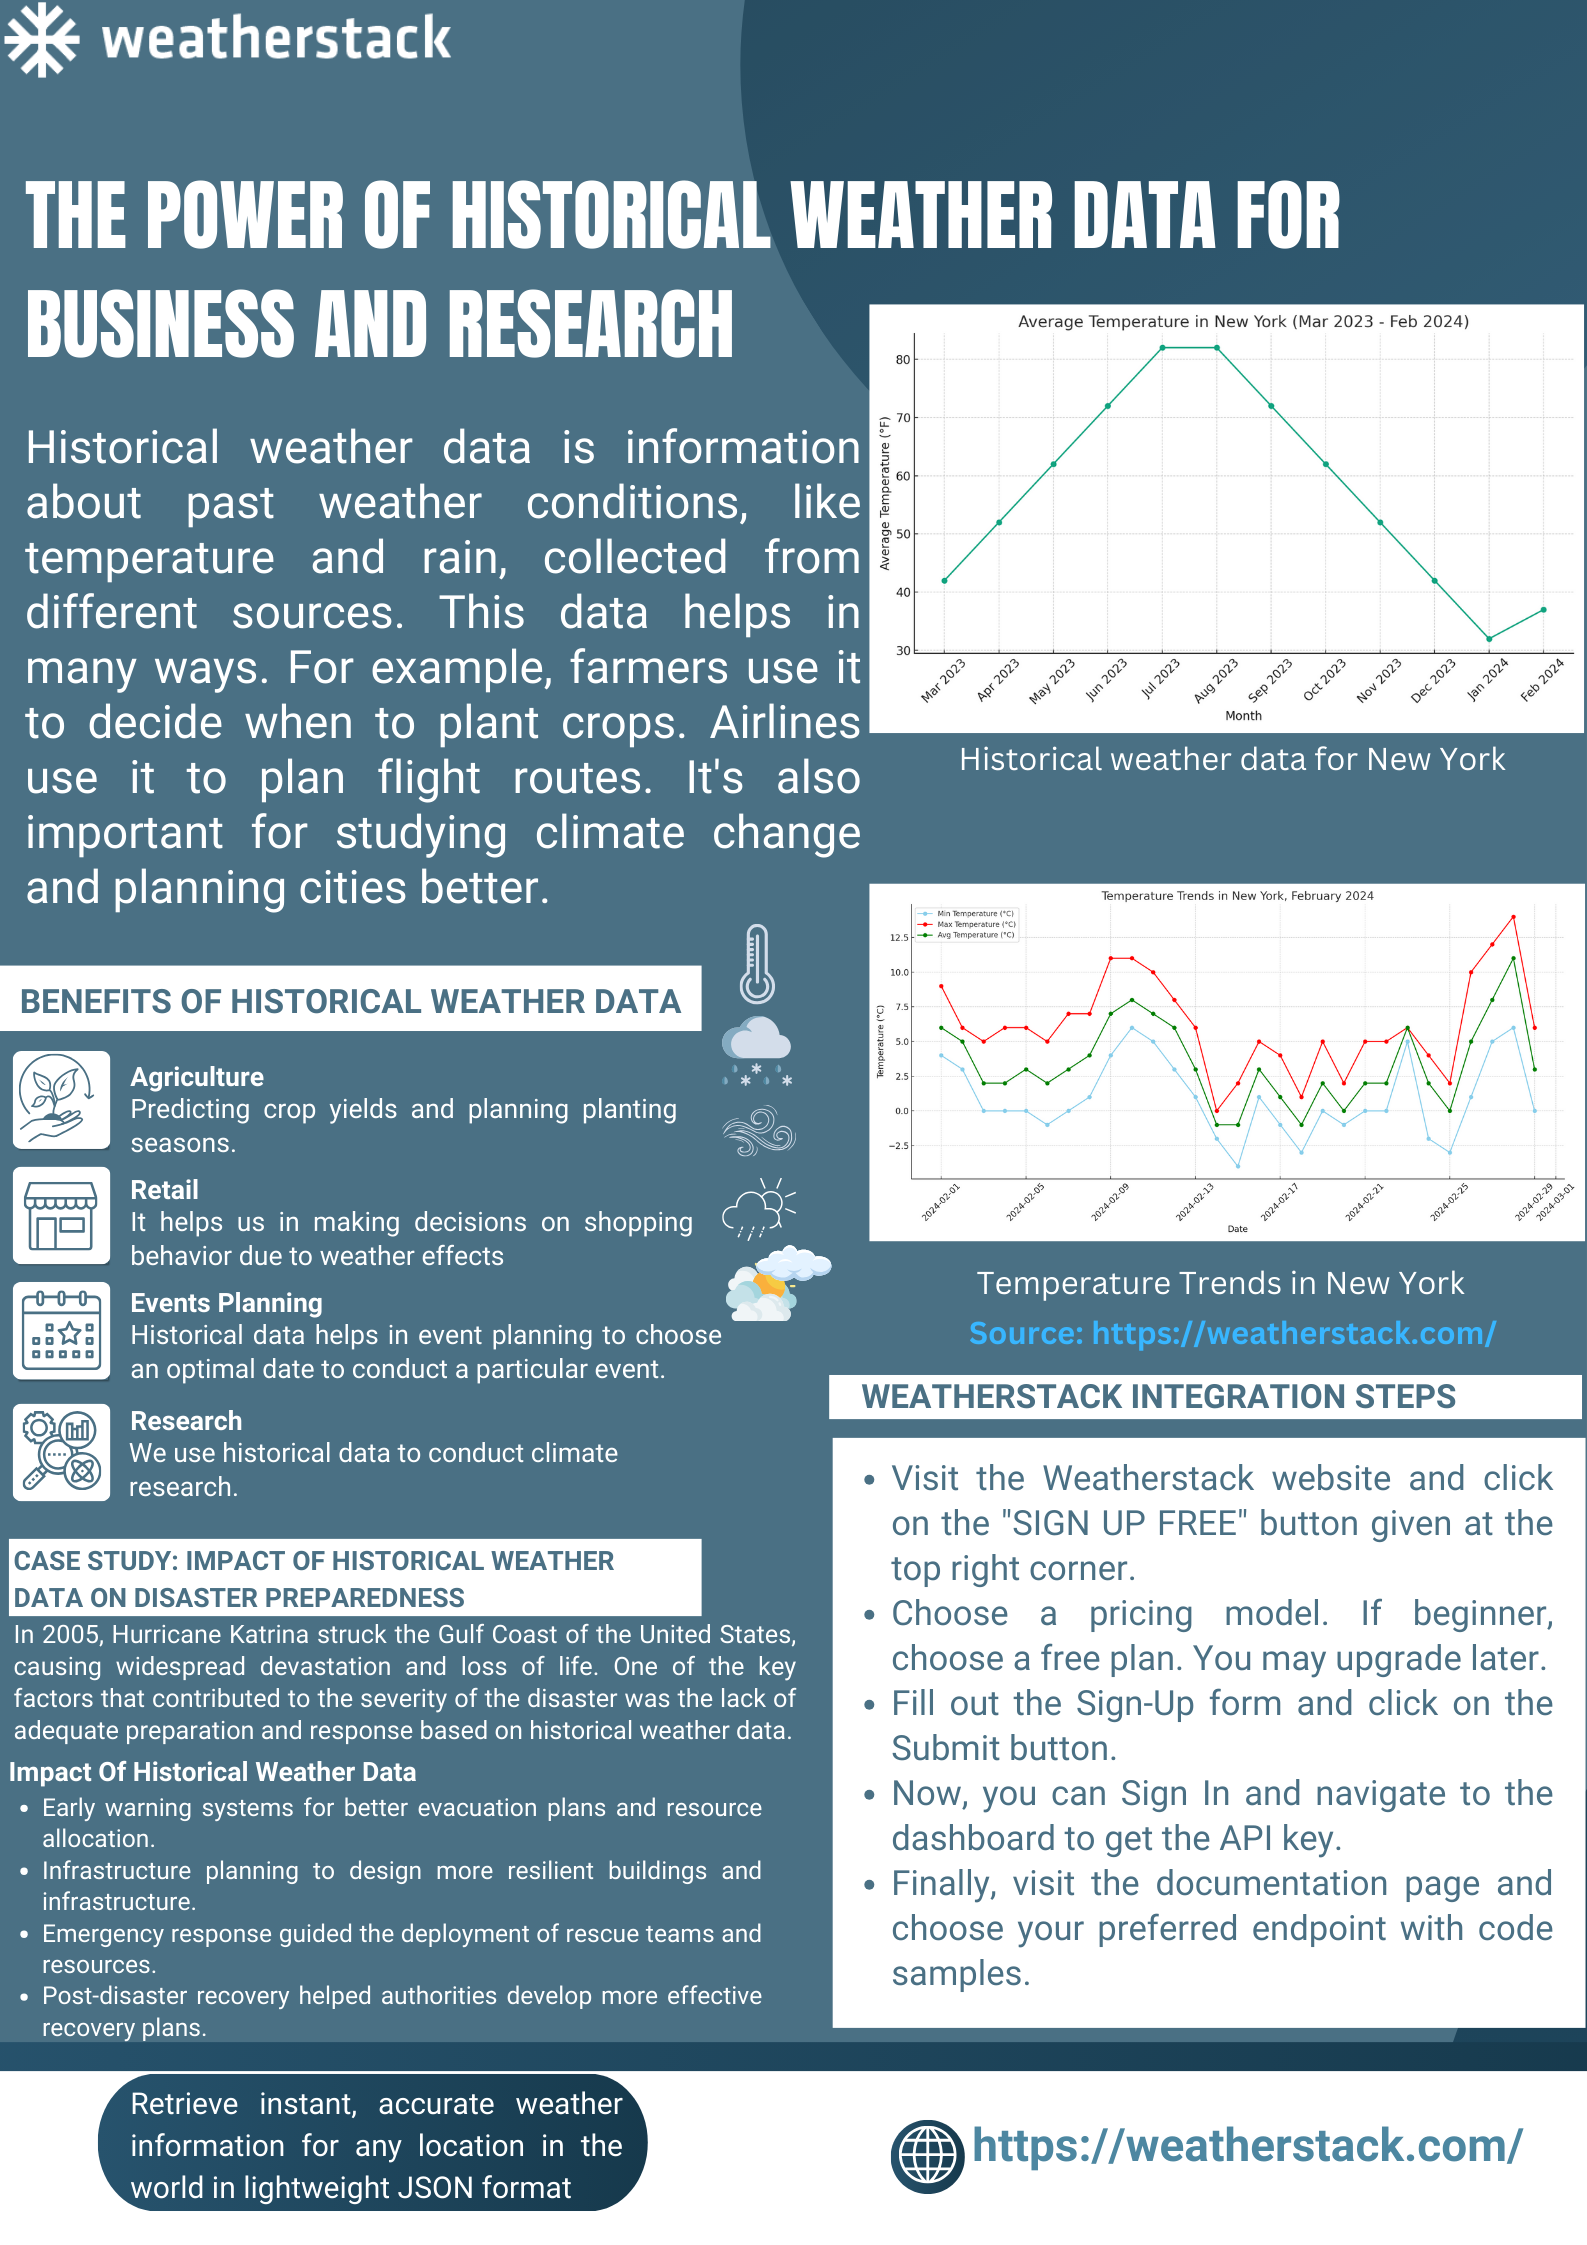 An informative infographic titled 'The Power of Historical Weather Data for Business and Research,' highlighting the various applications of past weather condition data. The infographic explains benefits across sectors like agriculture, retail, events planning, and research, and includes a case study on the impact of historical weather data on disaster preparedness, referencing Hurricane Katrina. It also features line graphs depicting historical weather data for New York, and guides readers through the steps for integrating the Weatherstack API, ending with a CTA for retrieving accurate weather information in JSON format from the Weatherstack website.